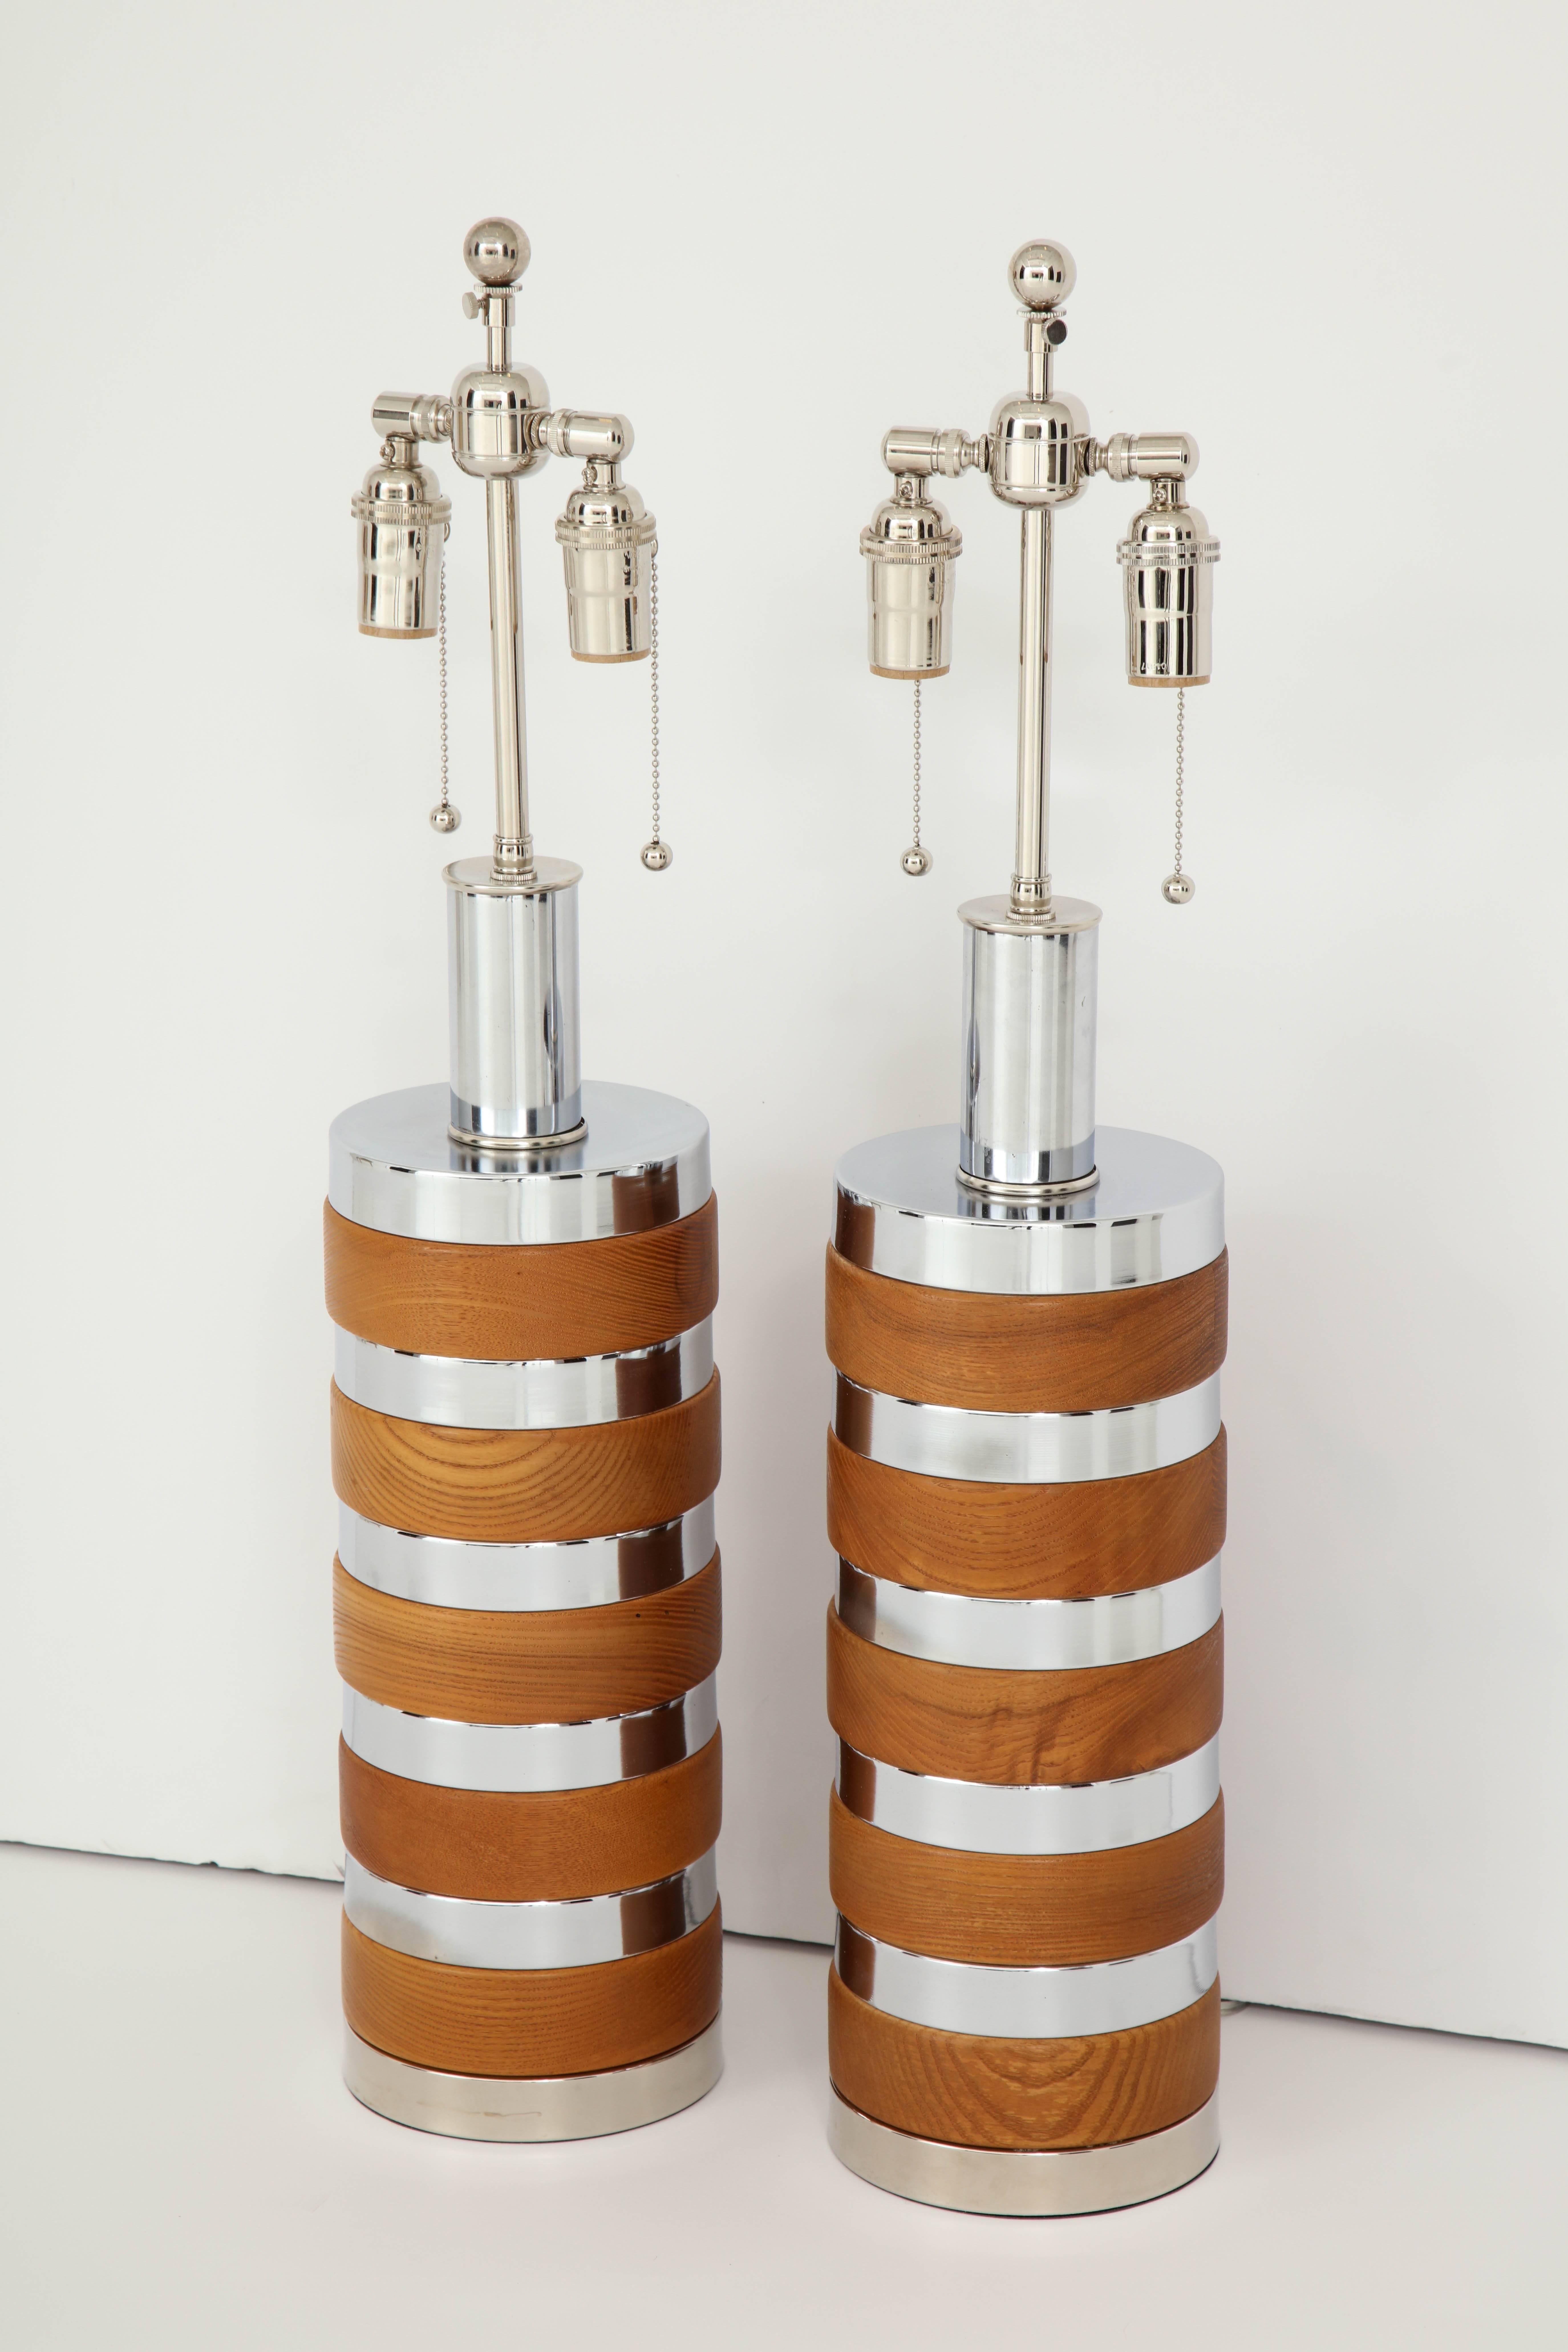 Large pair of cylindrical chrome and wood lamps by Laurel Lamp company.
The lamps have alternating discs of wood and chrome and they have been newly rewired with polished chrome double clusters that take standard light bulbs.